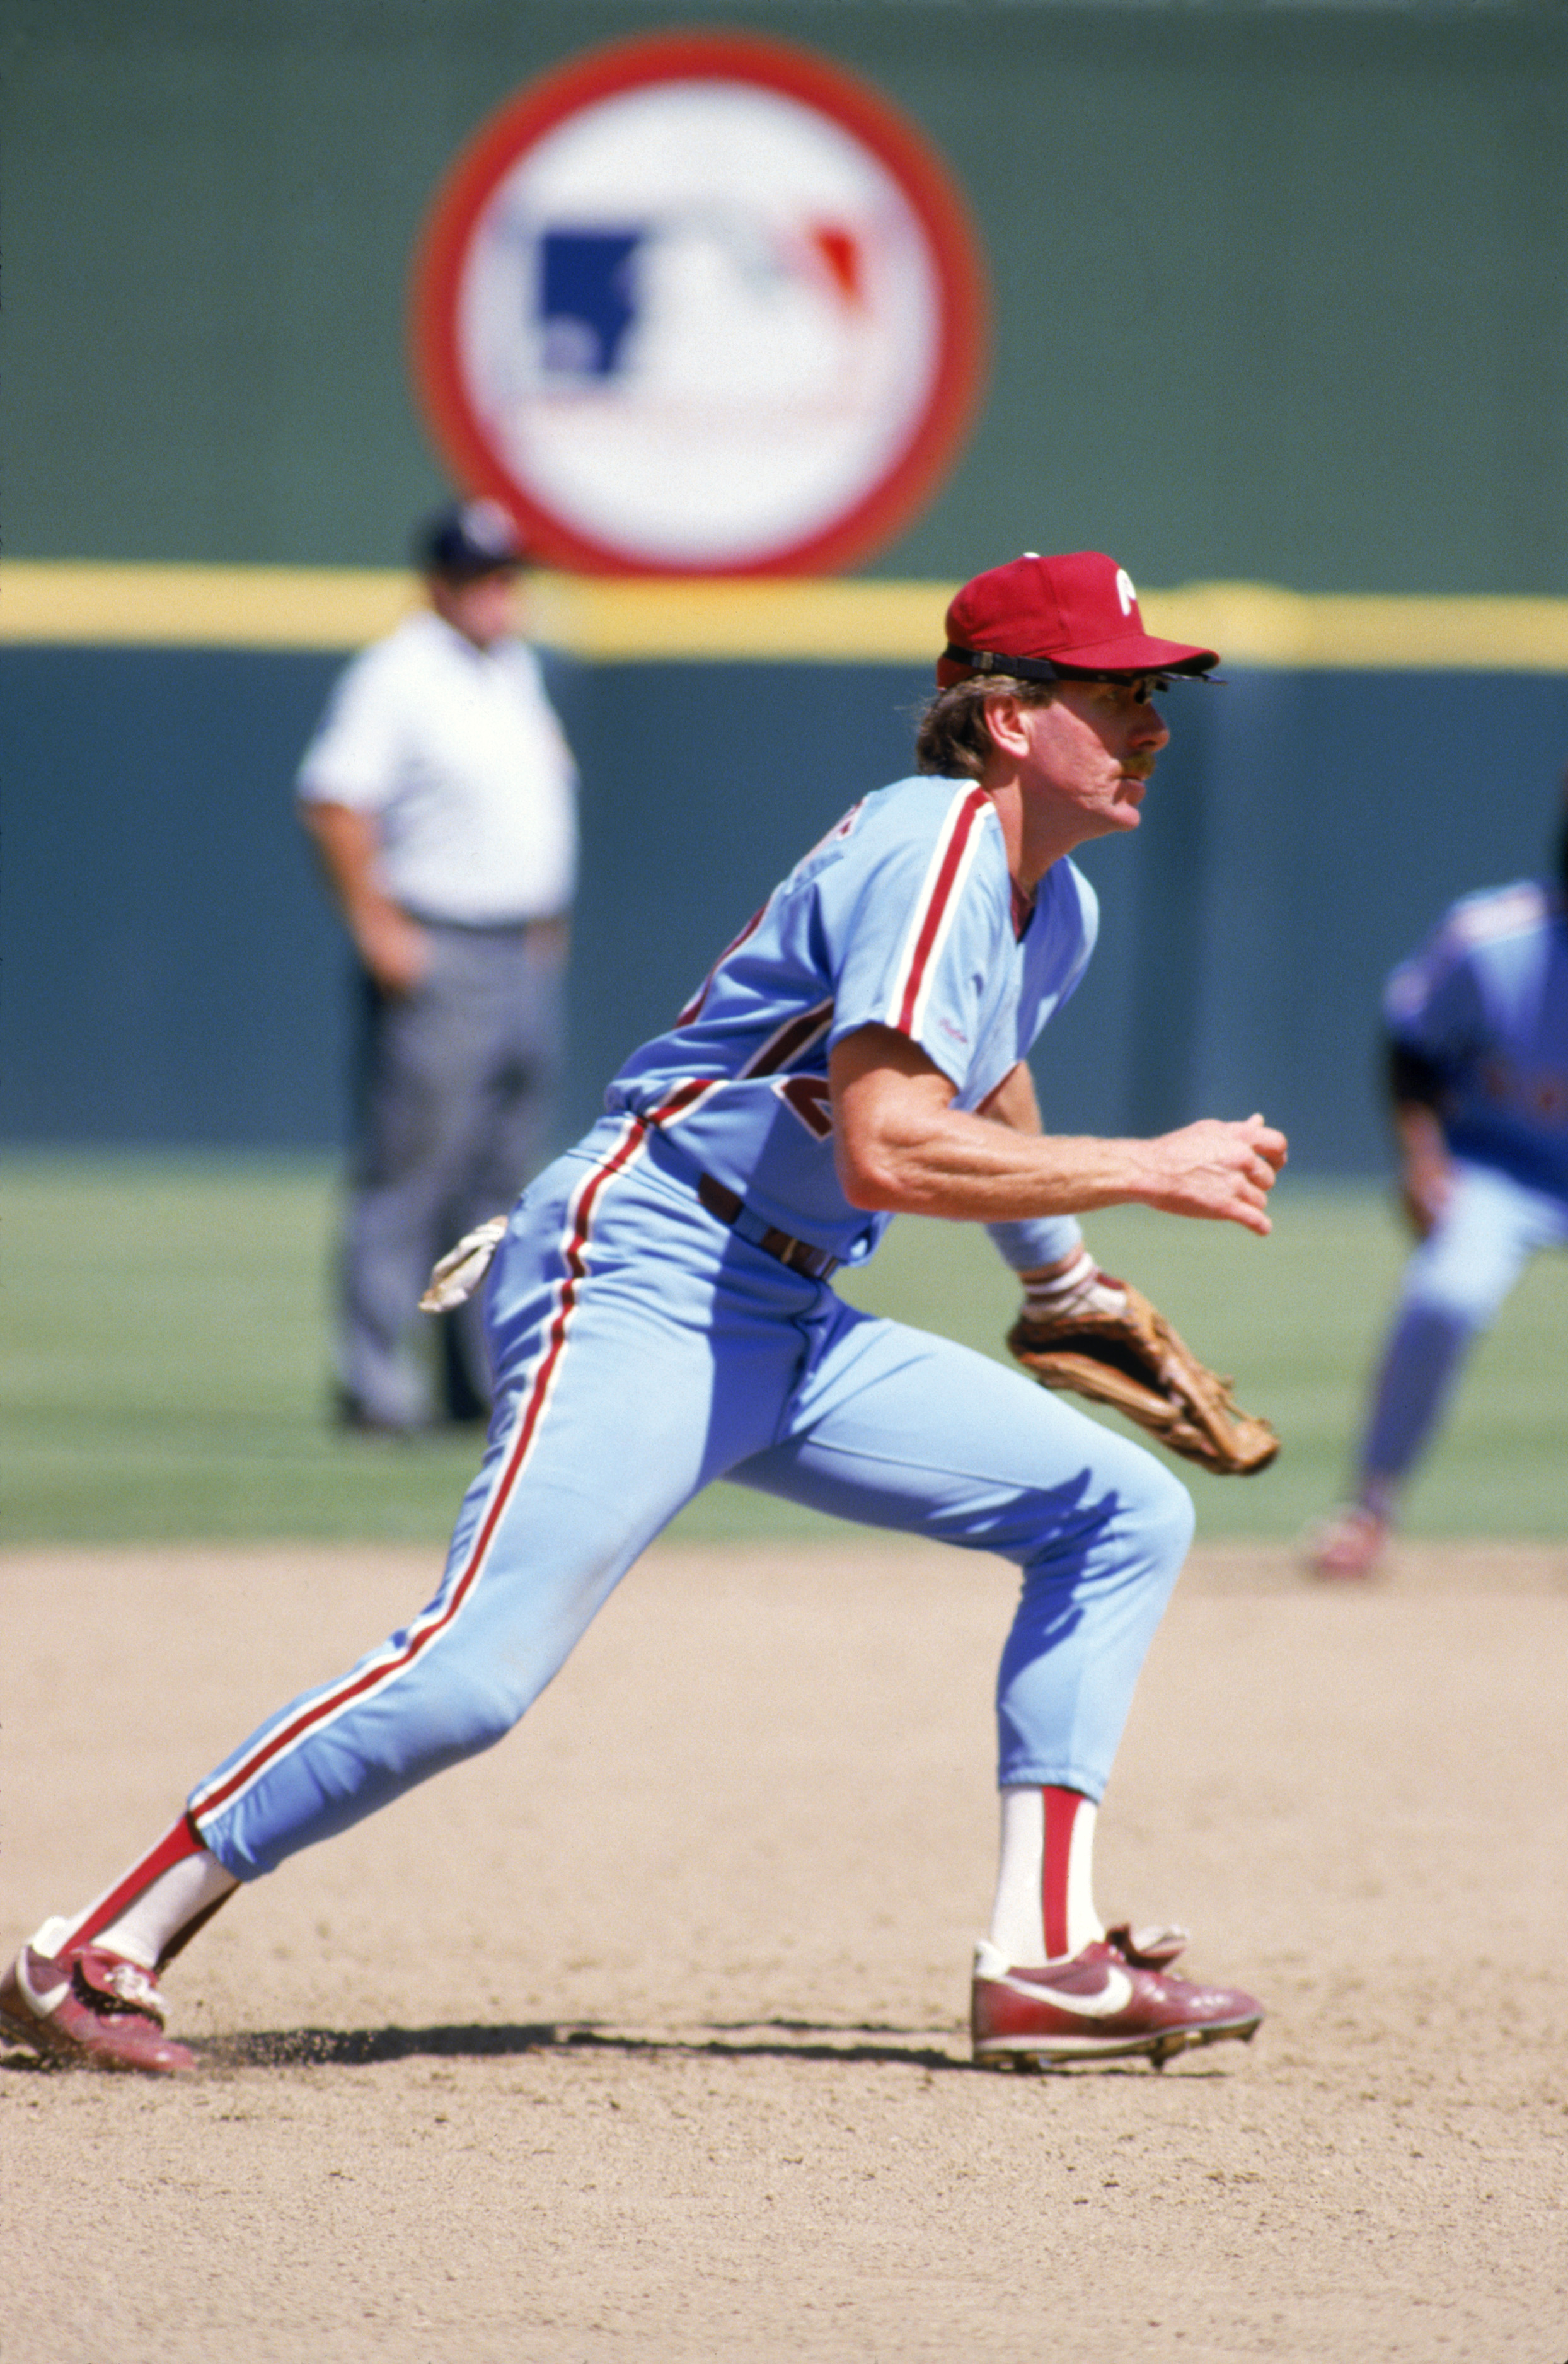 SAN DIEGO - 1987:  Mike Schmidt #20 of the Philadelphia Phillies runs in the infield during a 1987 season game against the Padres at Jack Murphy Stadium in San Diego, California. (Photo by Stephen Dunn/Getty Images)